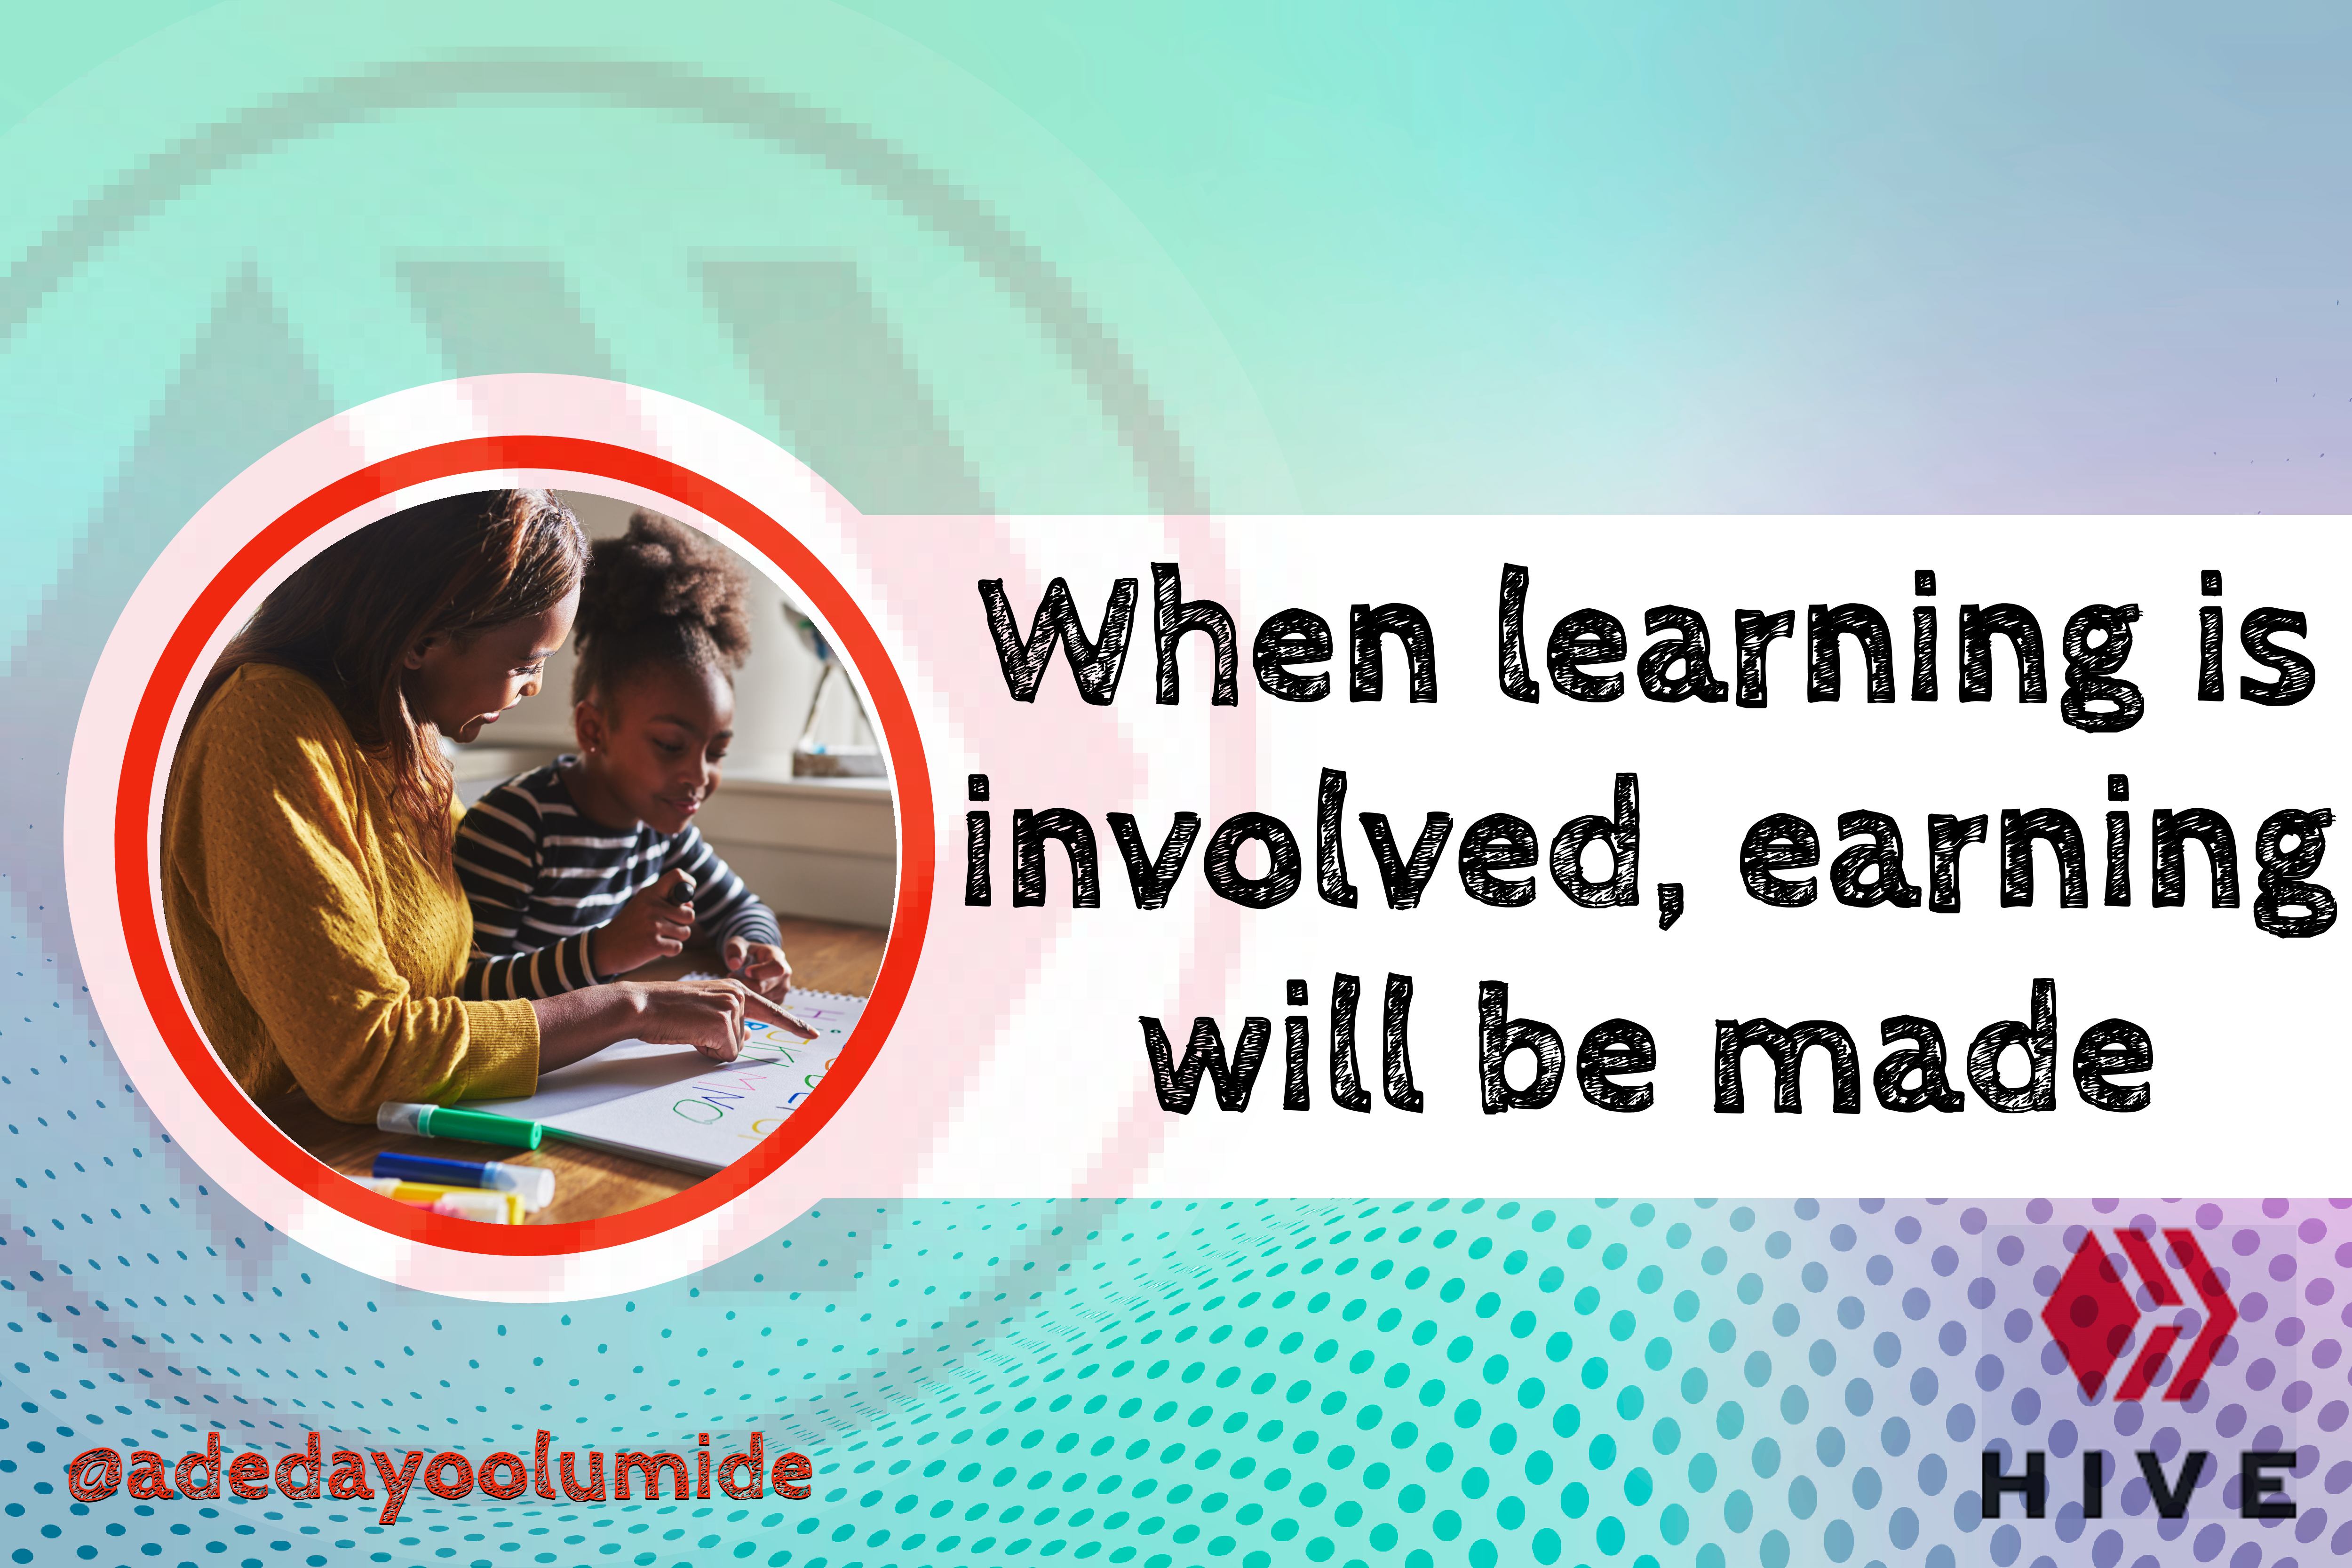 @adedayoolumide/when-learning-is-involved-earning-will-be-made